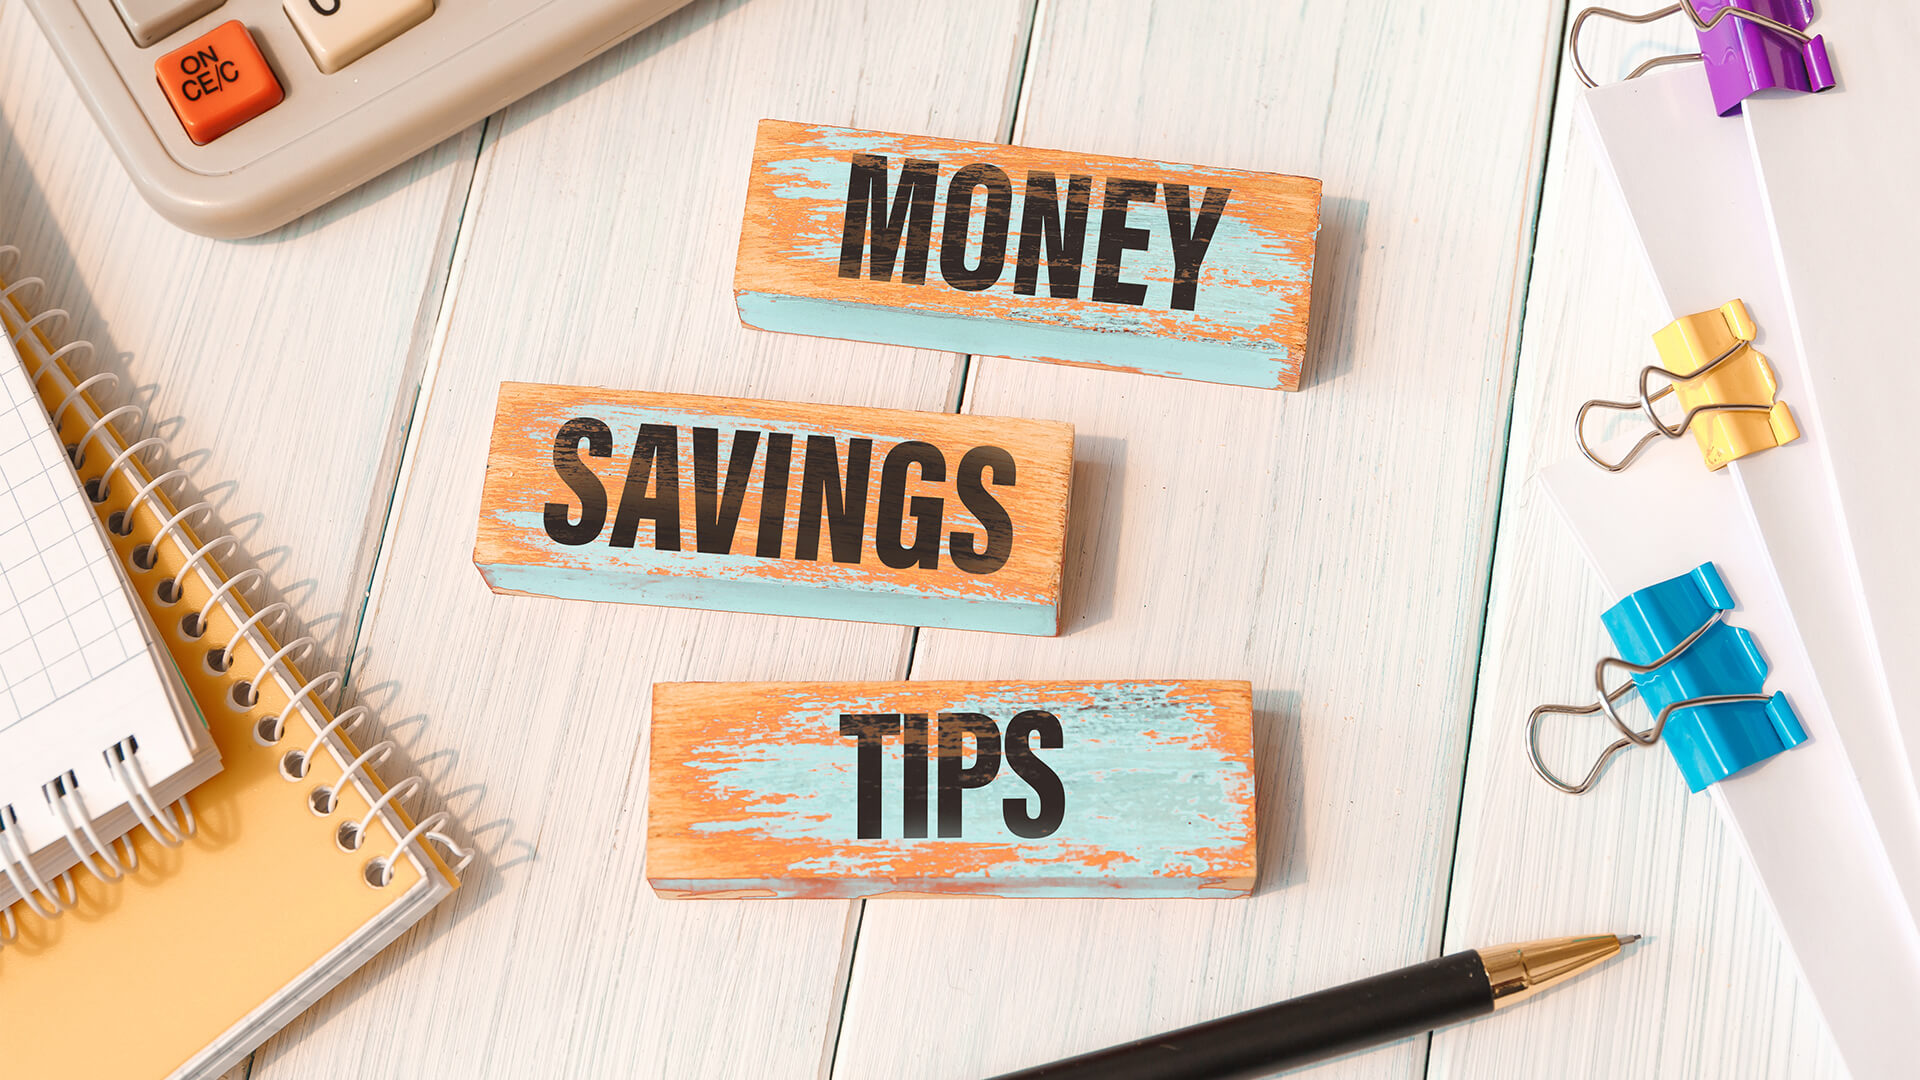  The image shows three wooden blocks with the words 'MONEY', 'SAVINGS', and 'TIPS' on them. There is a calculator, a notebook, and some paper clips on the table. The image represents the search query 'Tips for saving money on family expenses'.